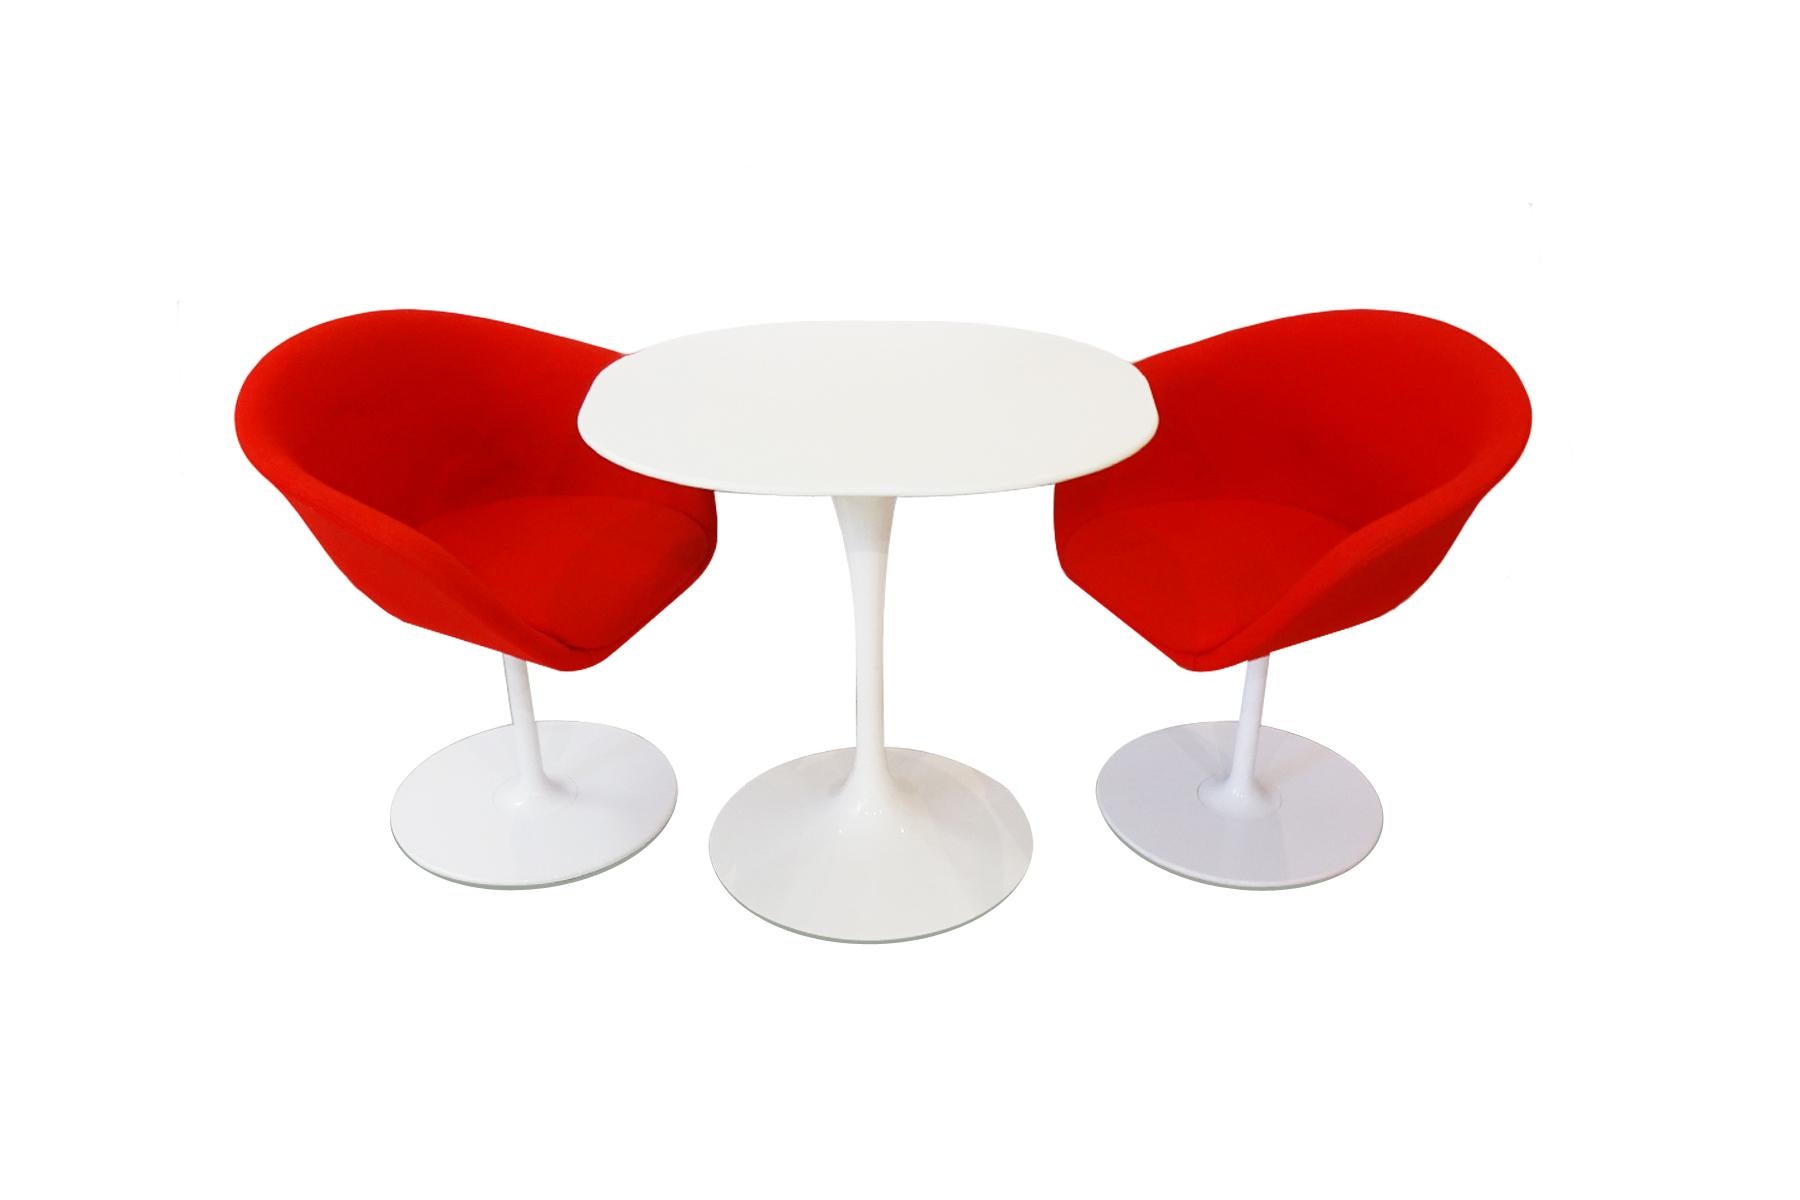 Contemporary Small Dining Set, Eero Saarinen Knoll Side Table, Arper Chairs and Poppy Rug